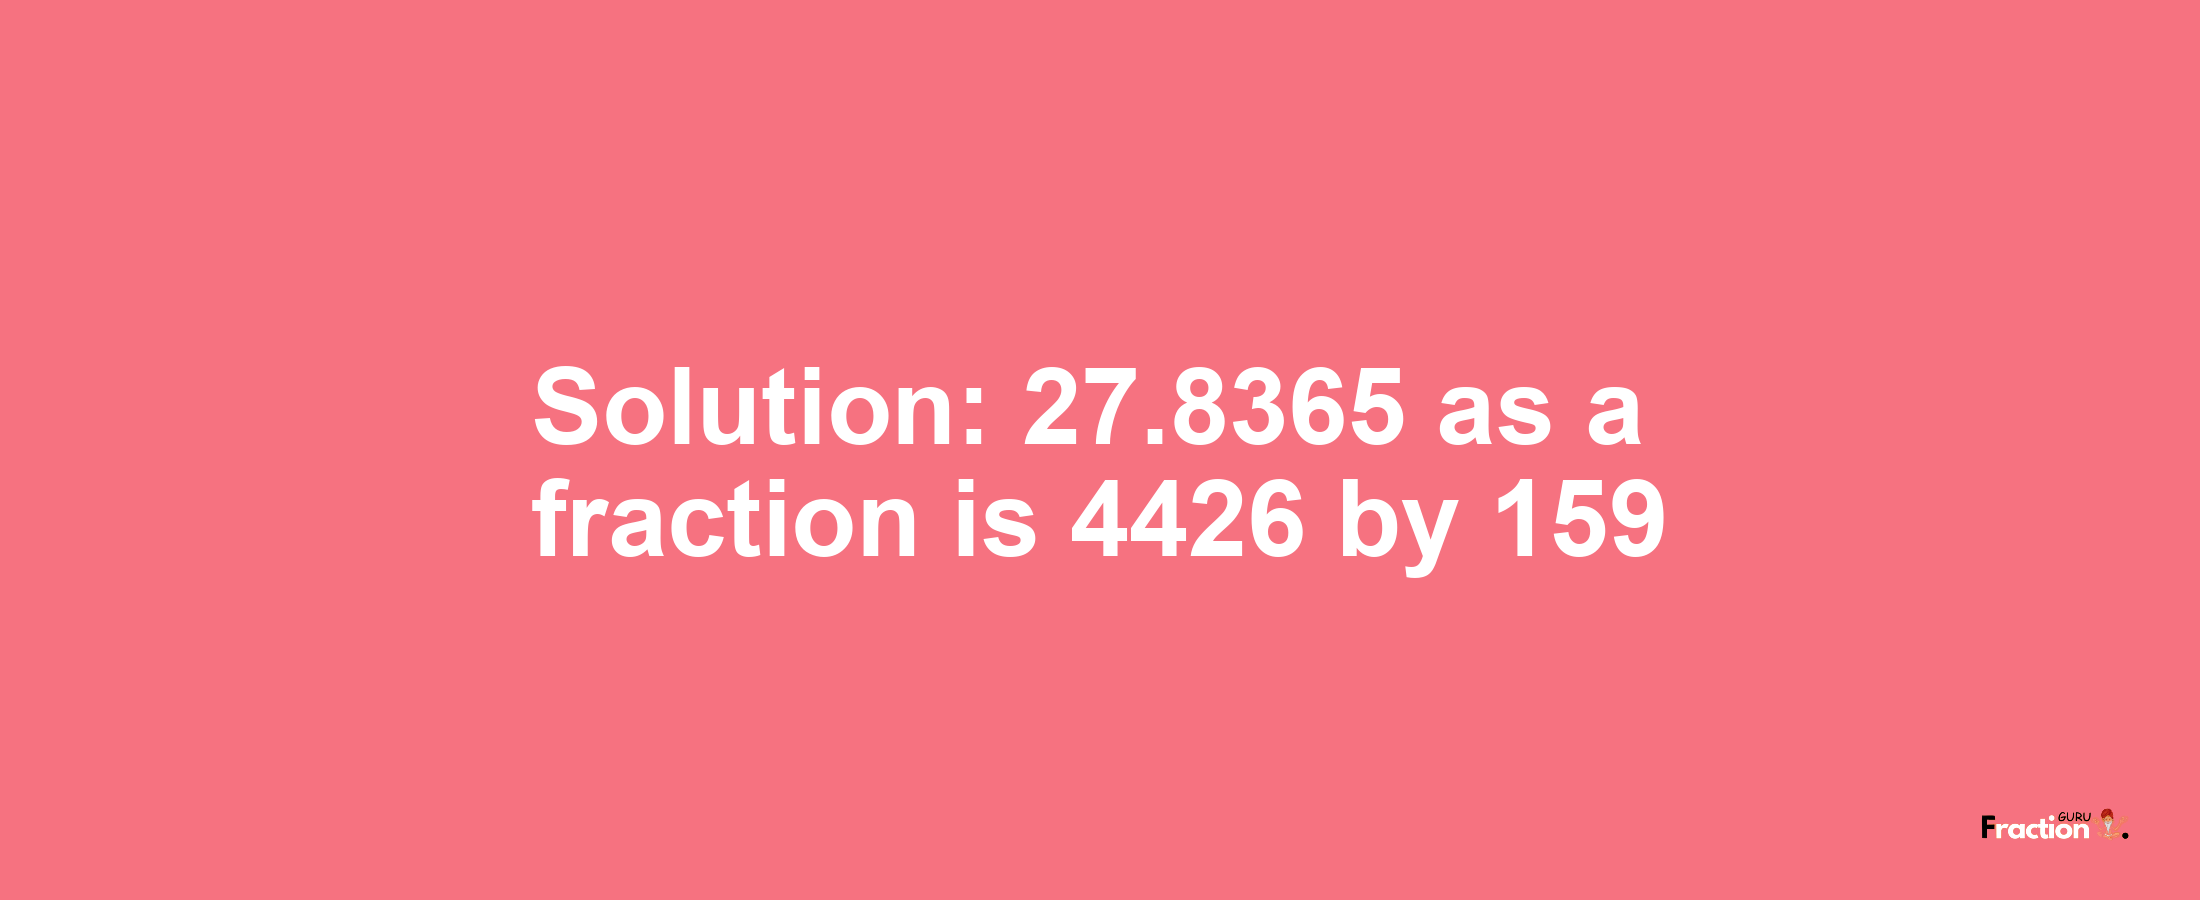 Solution:27.8365 as a fraction is 4426/159